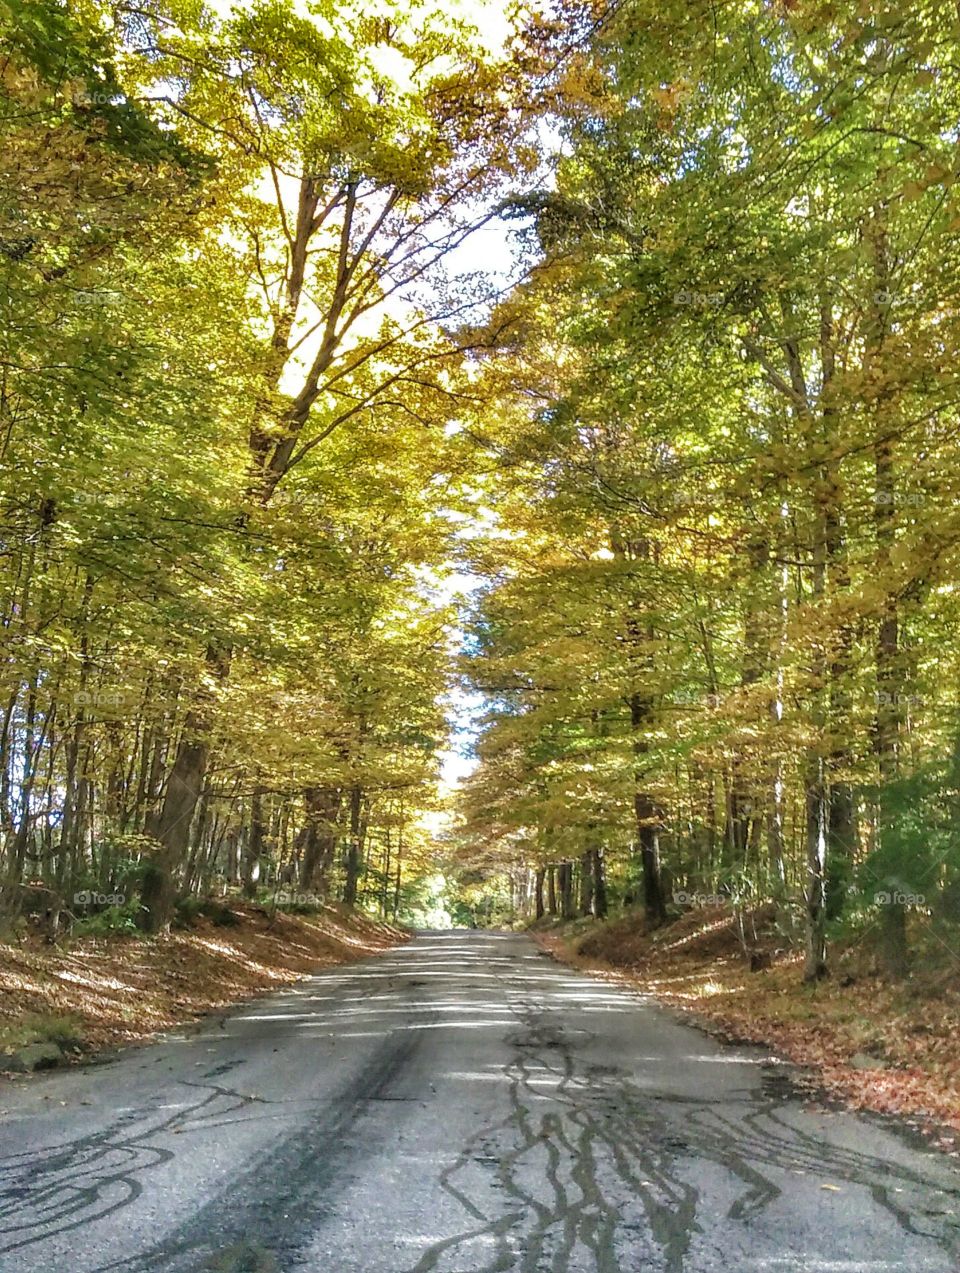 Autumn drive down a country ro. i thought this scenery was beautiful